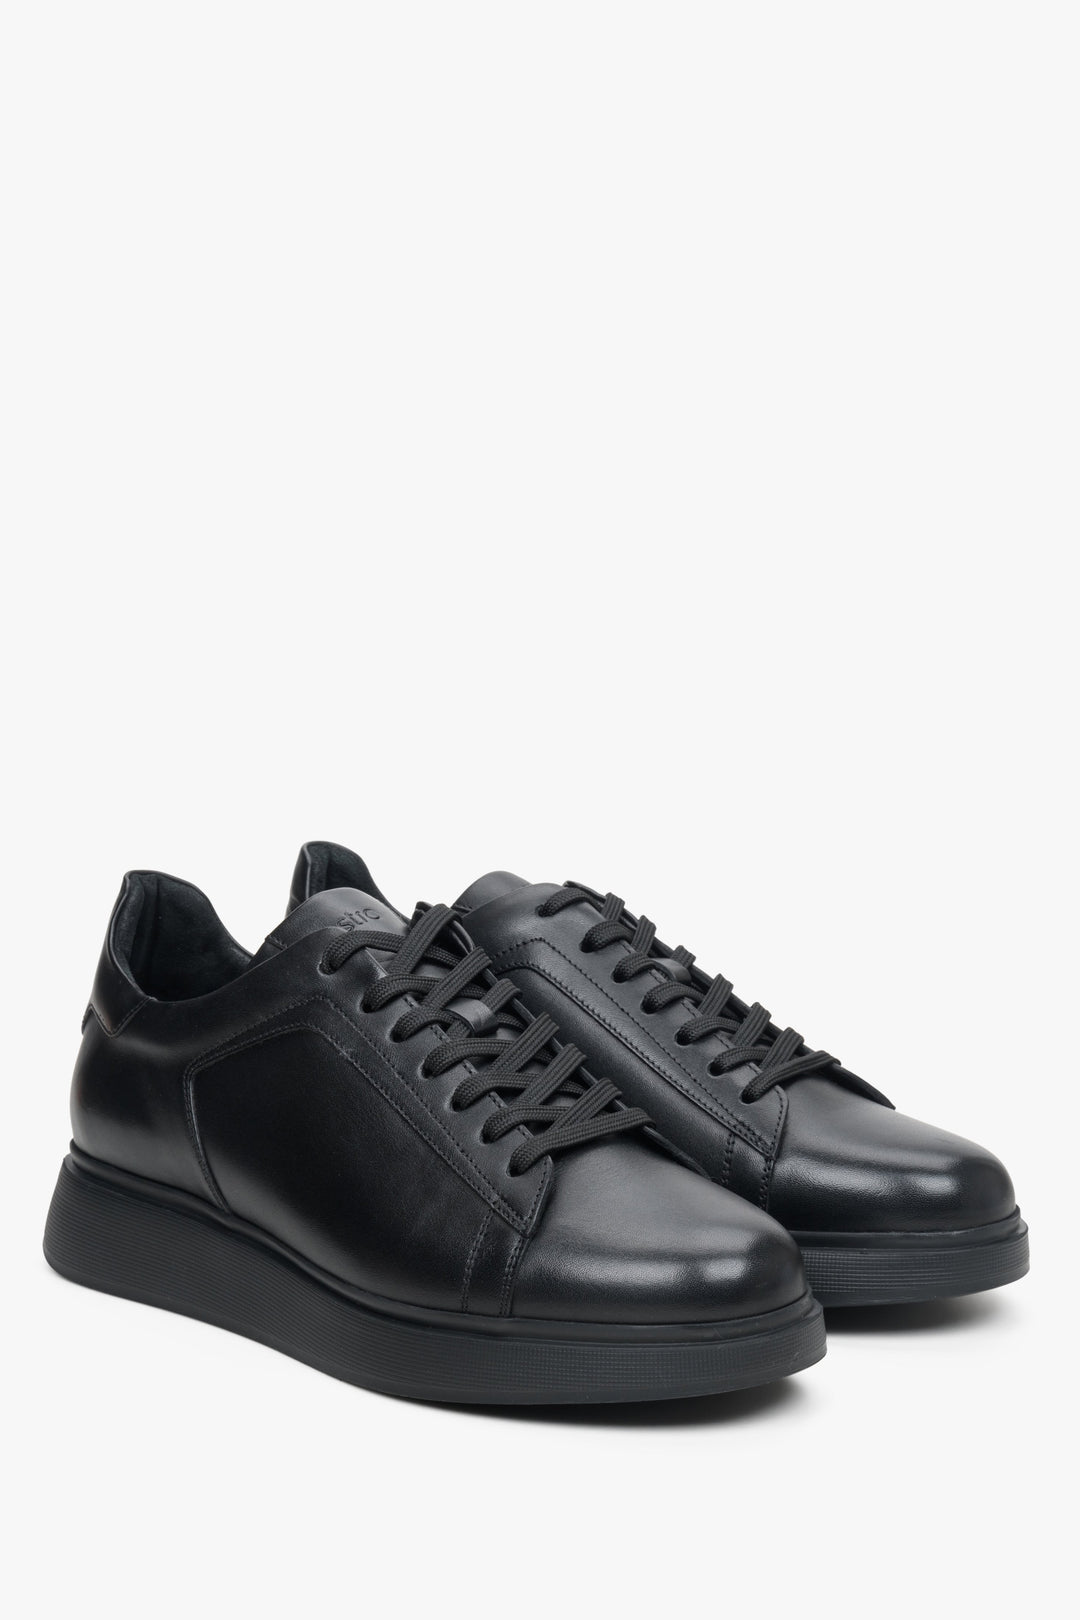 Men's low black sneakers with lacing in genuine leather by Estro.